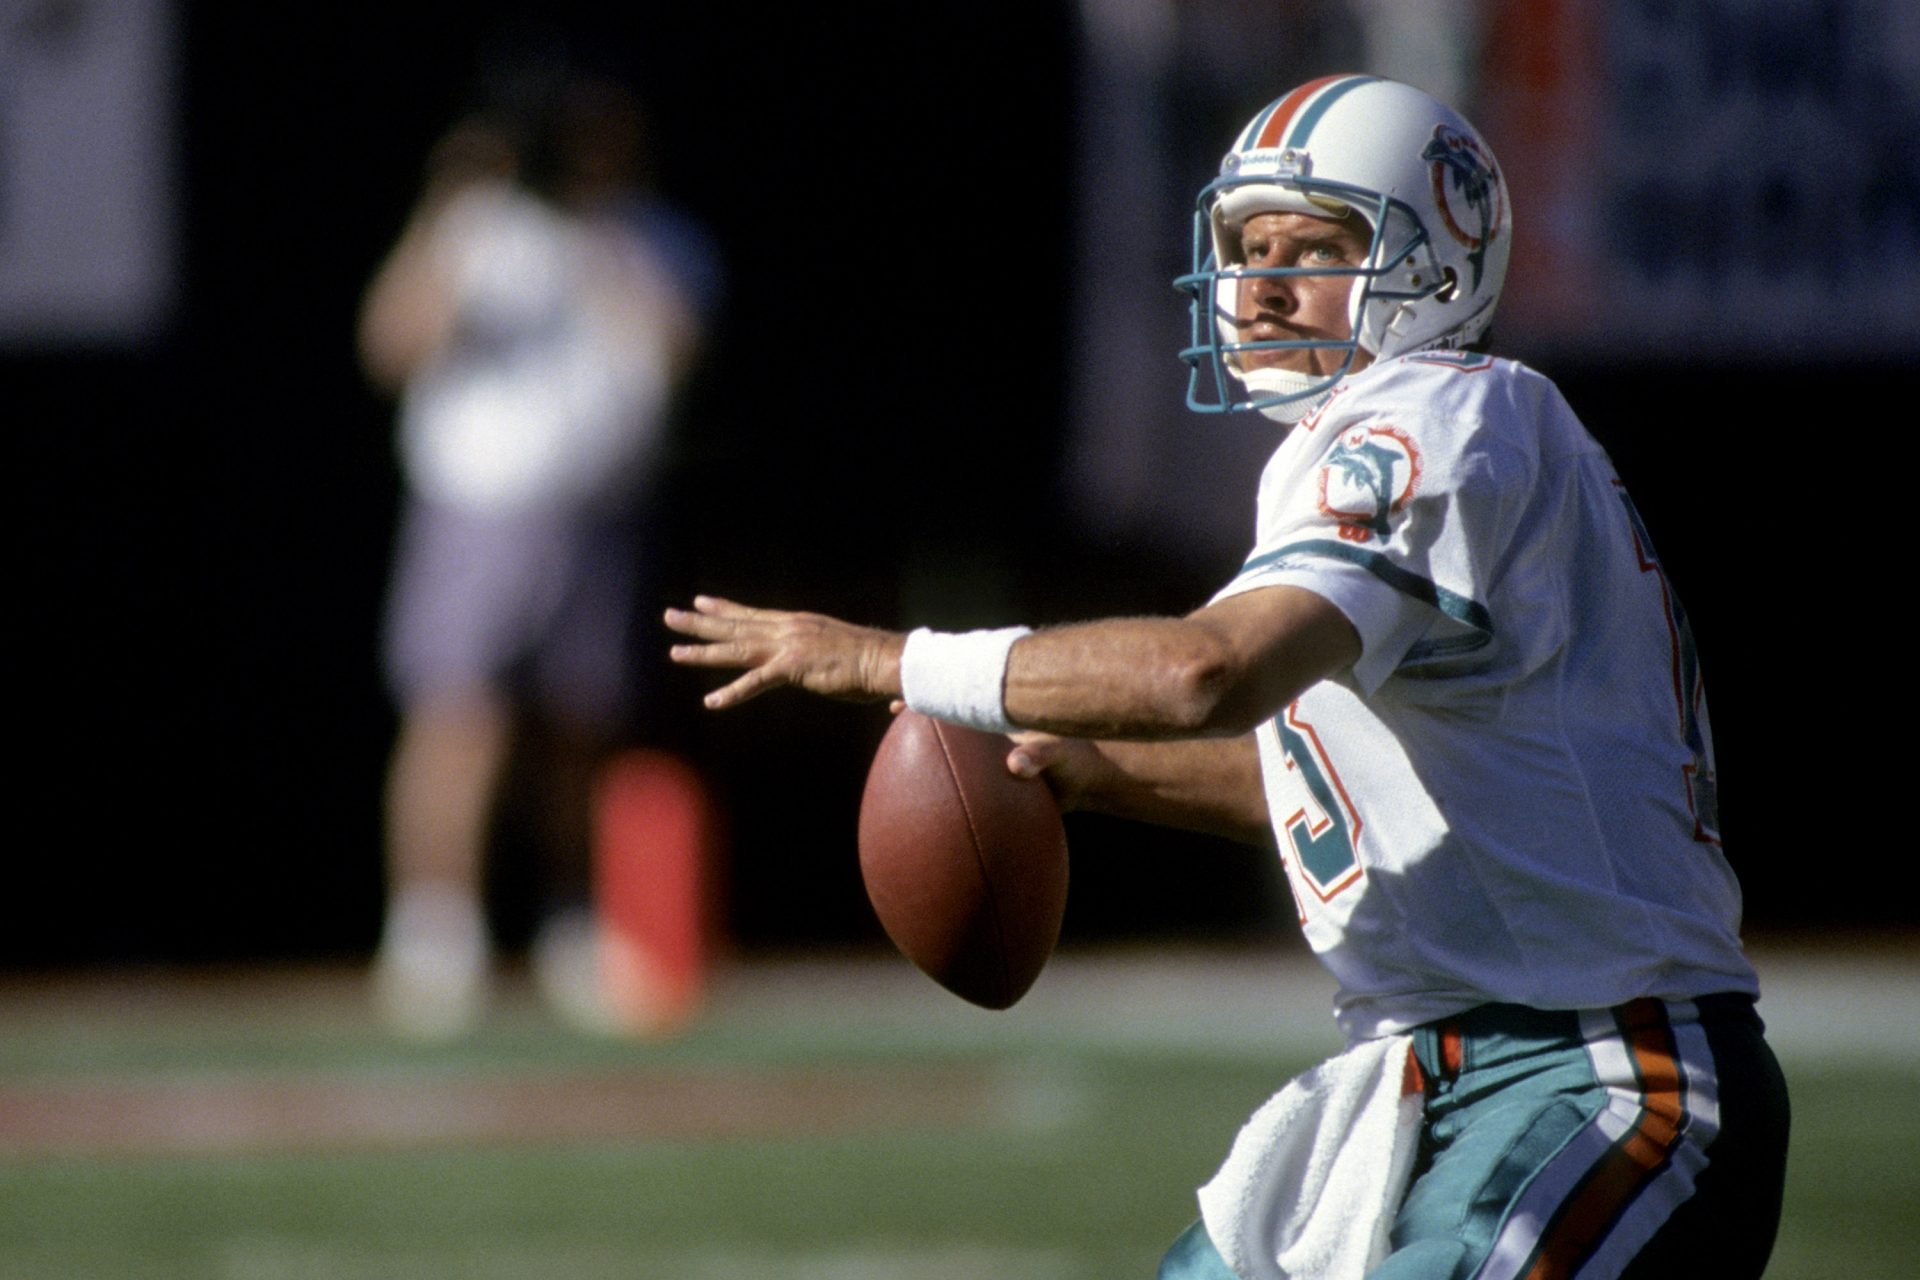 Drugs, infidelity and the elusive Super Bowl win: What happened to NFL star Dan Marino?